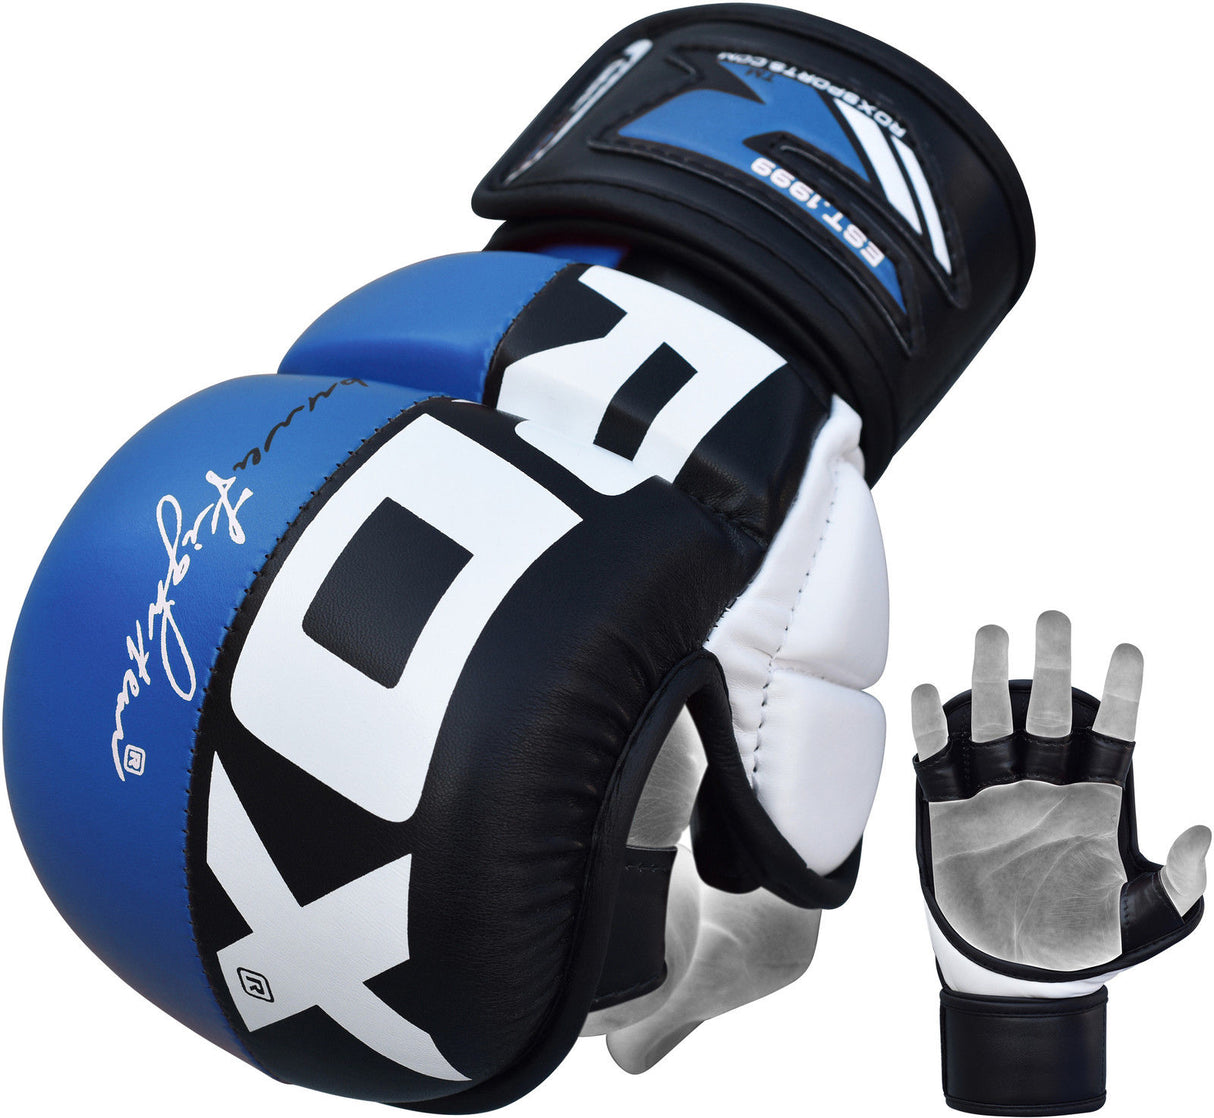 Boxing Gloves By RDX, MMA Kickboxing Sparring Gloves for Men, Muay